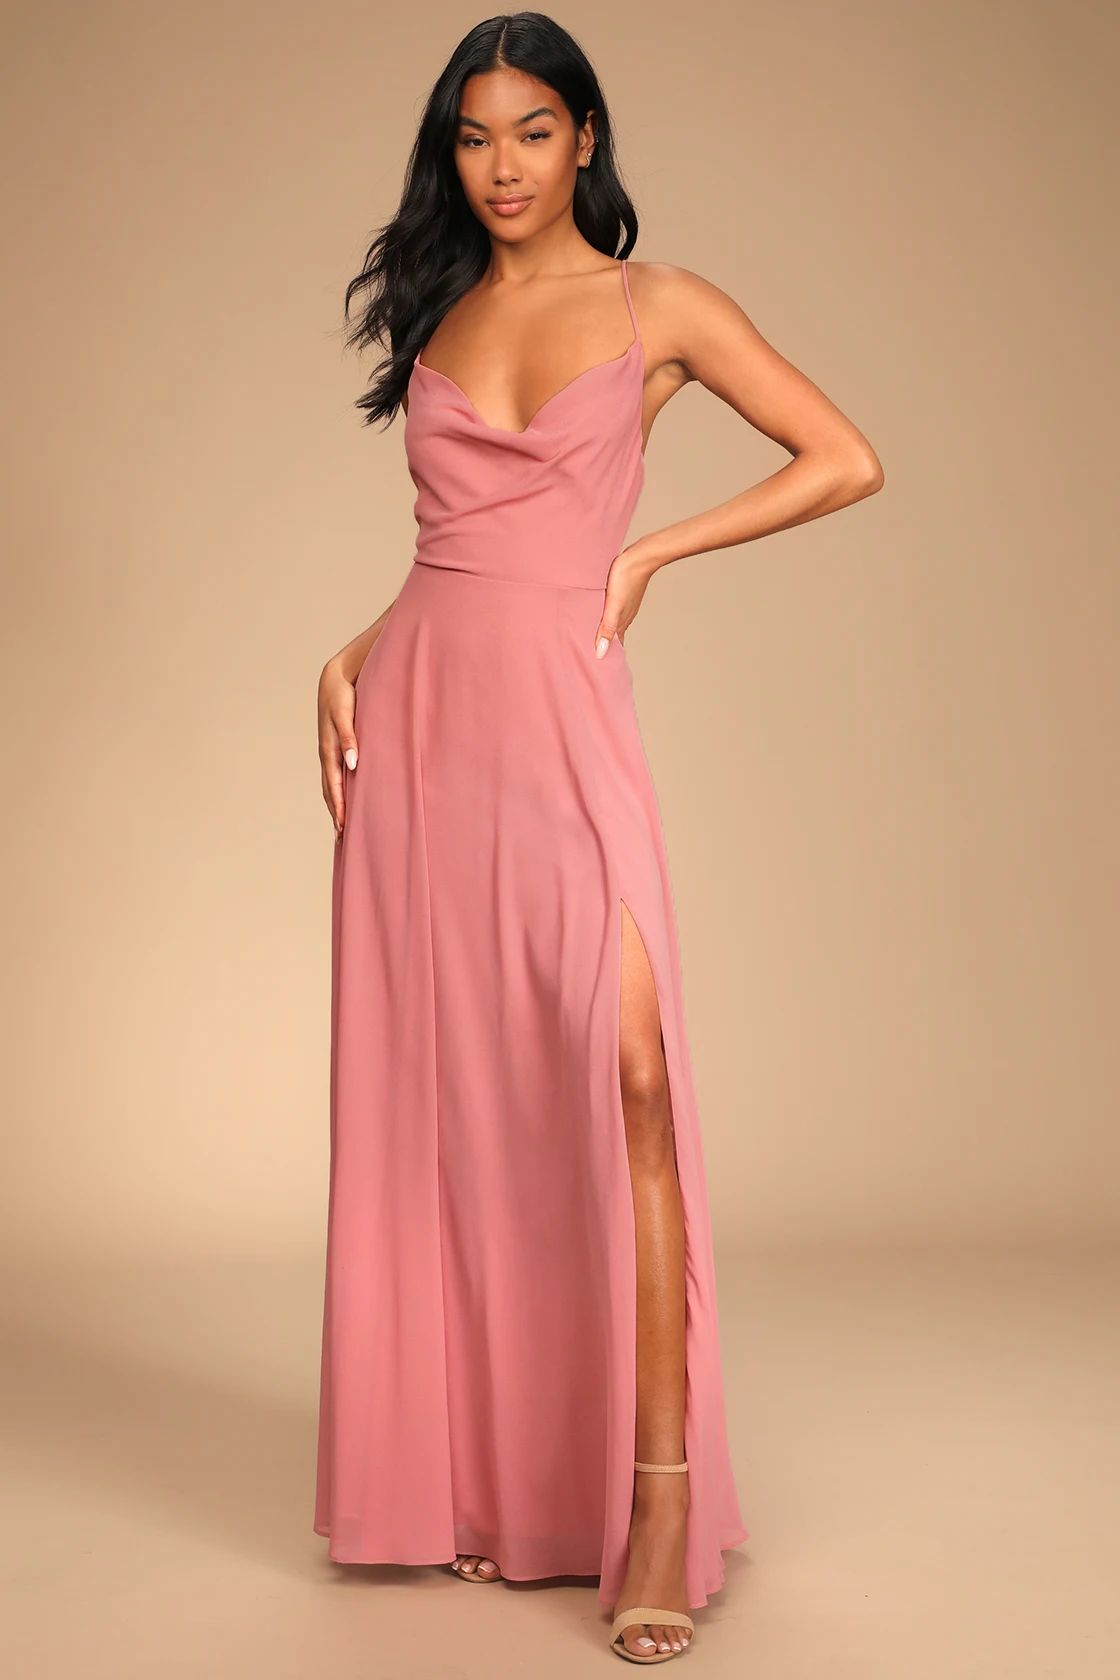 Romantically Speaking Rose Pink Cowl Lace-Up Maxi Dress | Lulus (US)